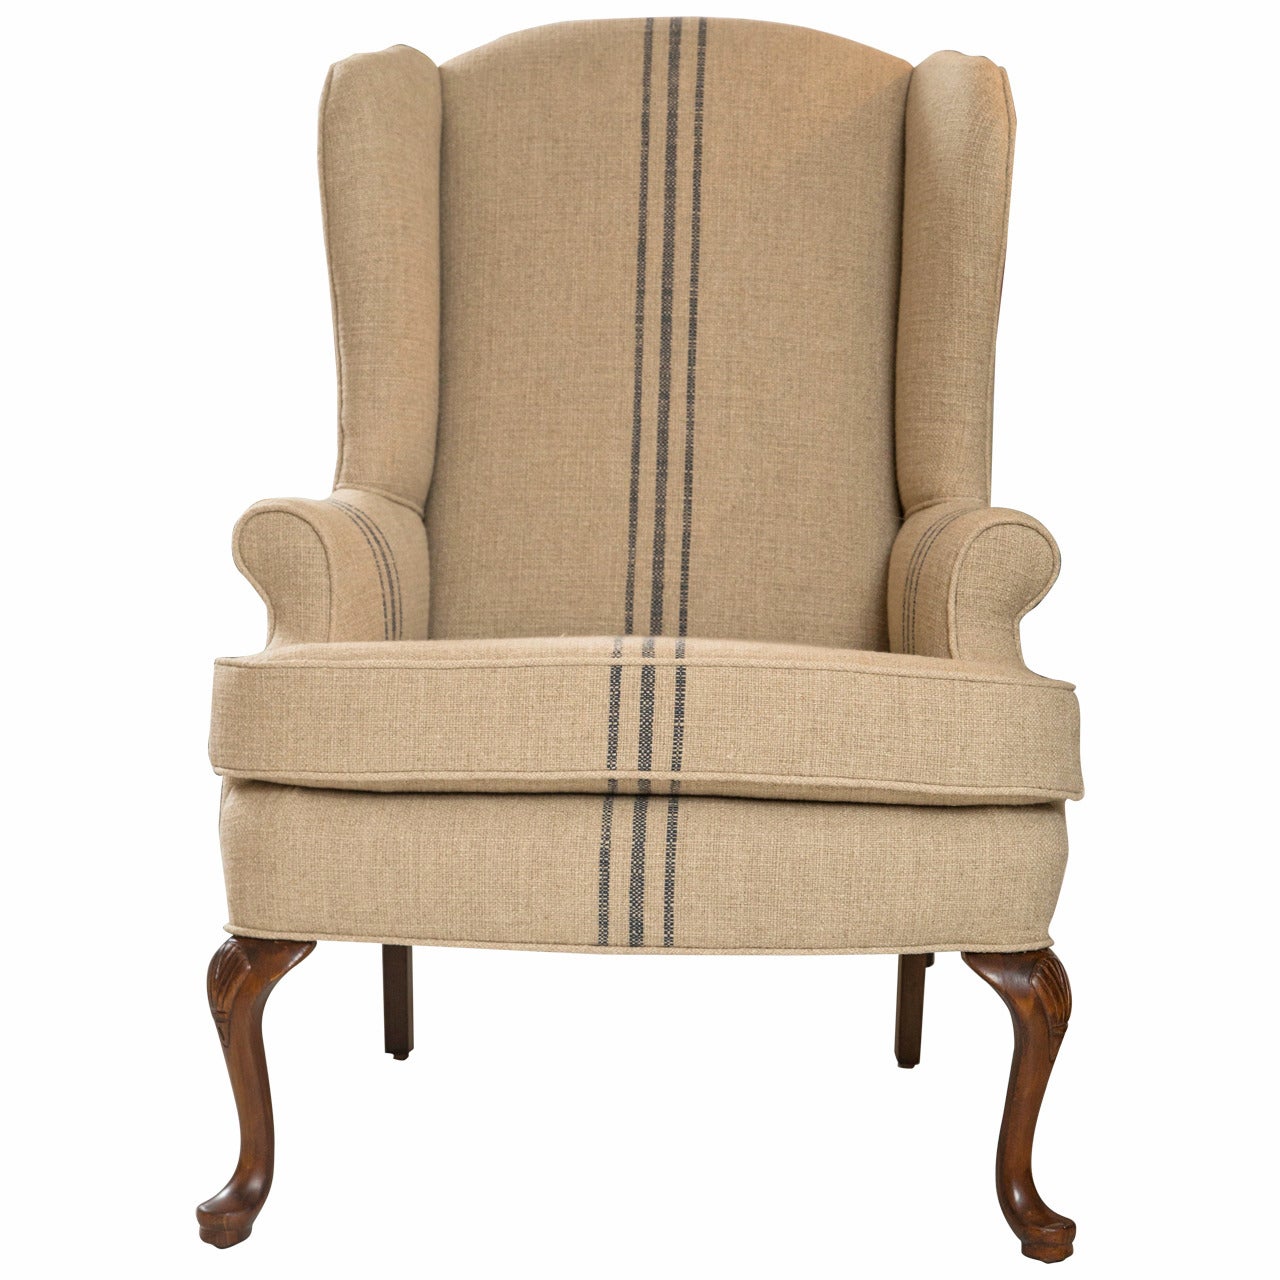 Classic Mid-Century Wing Chair